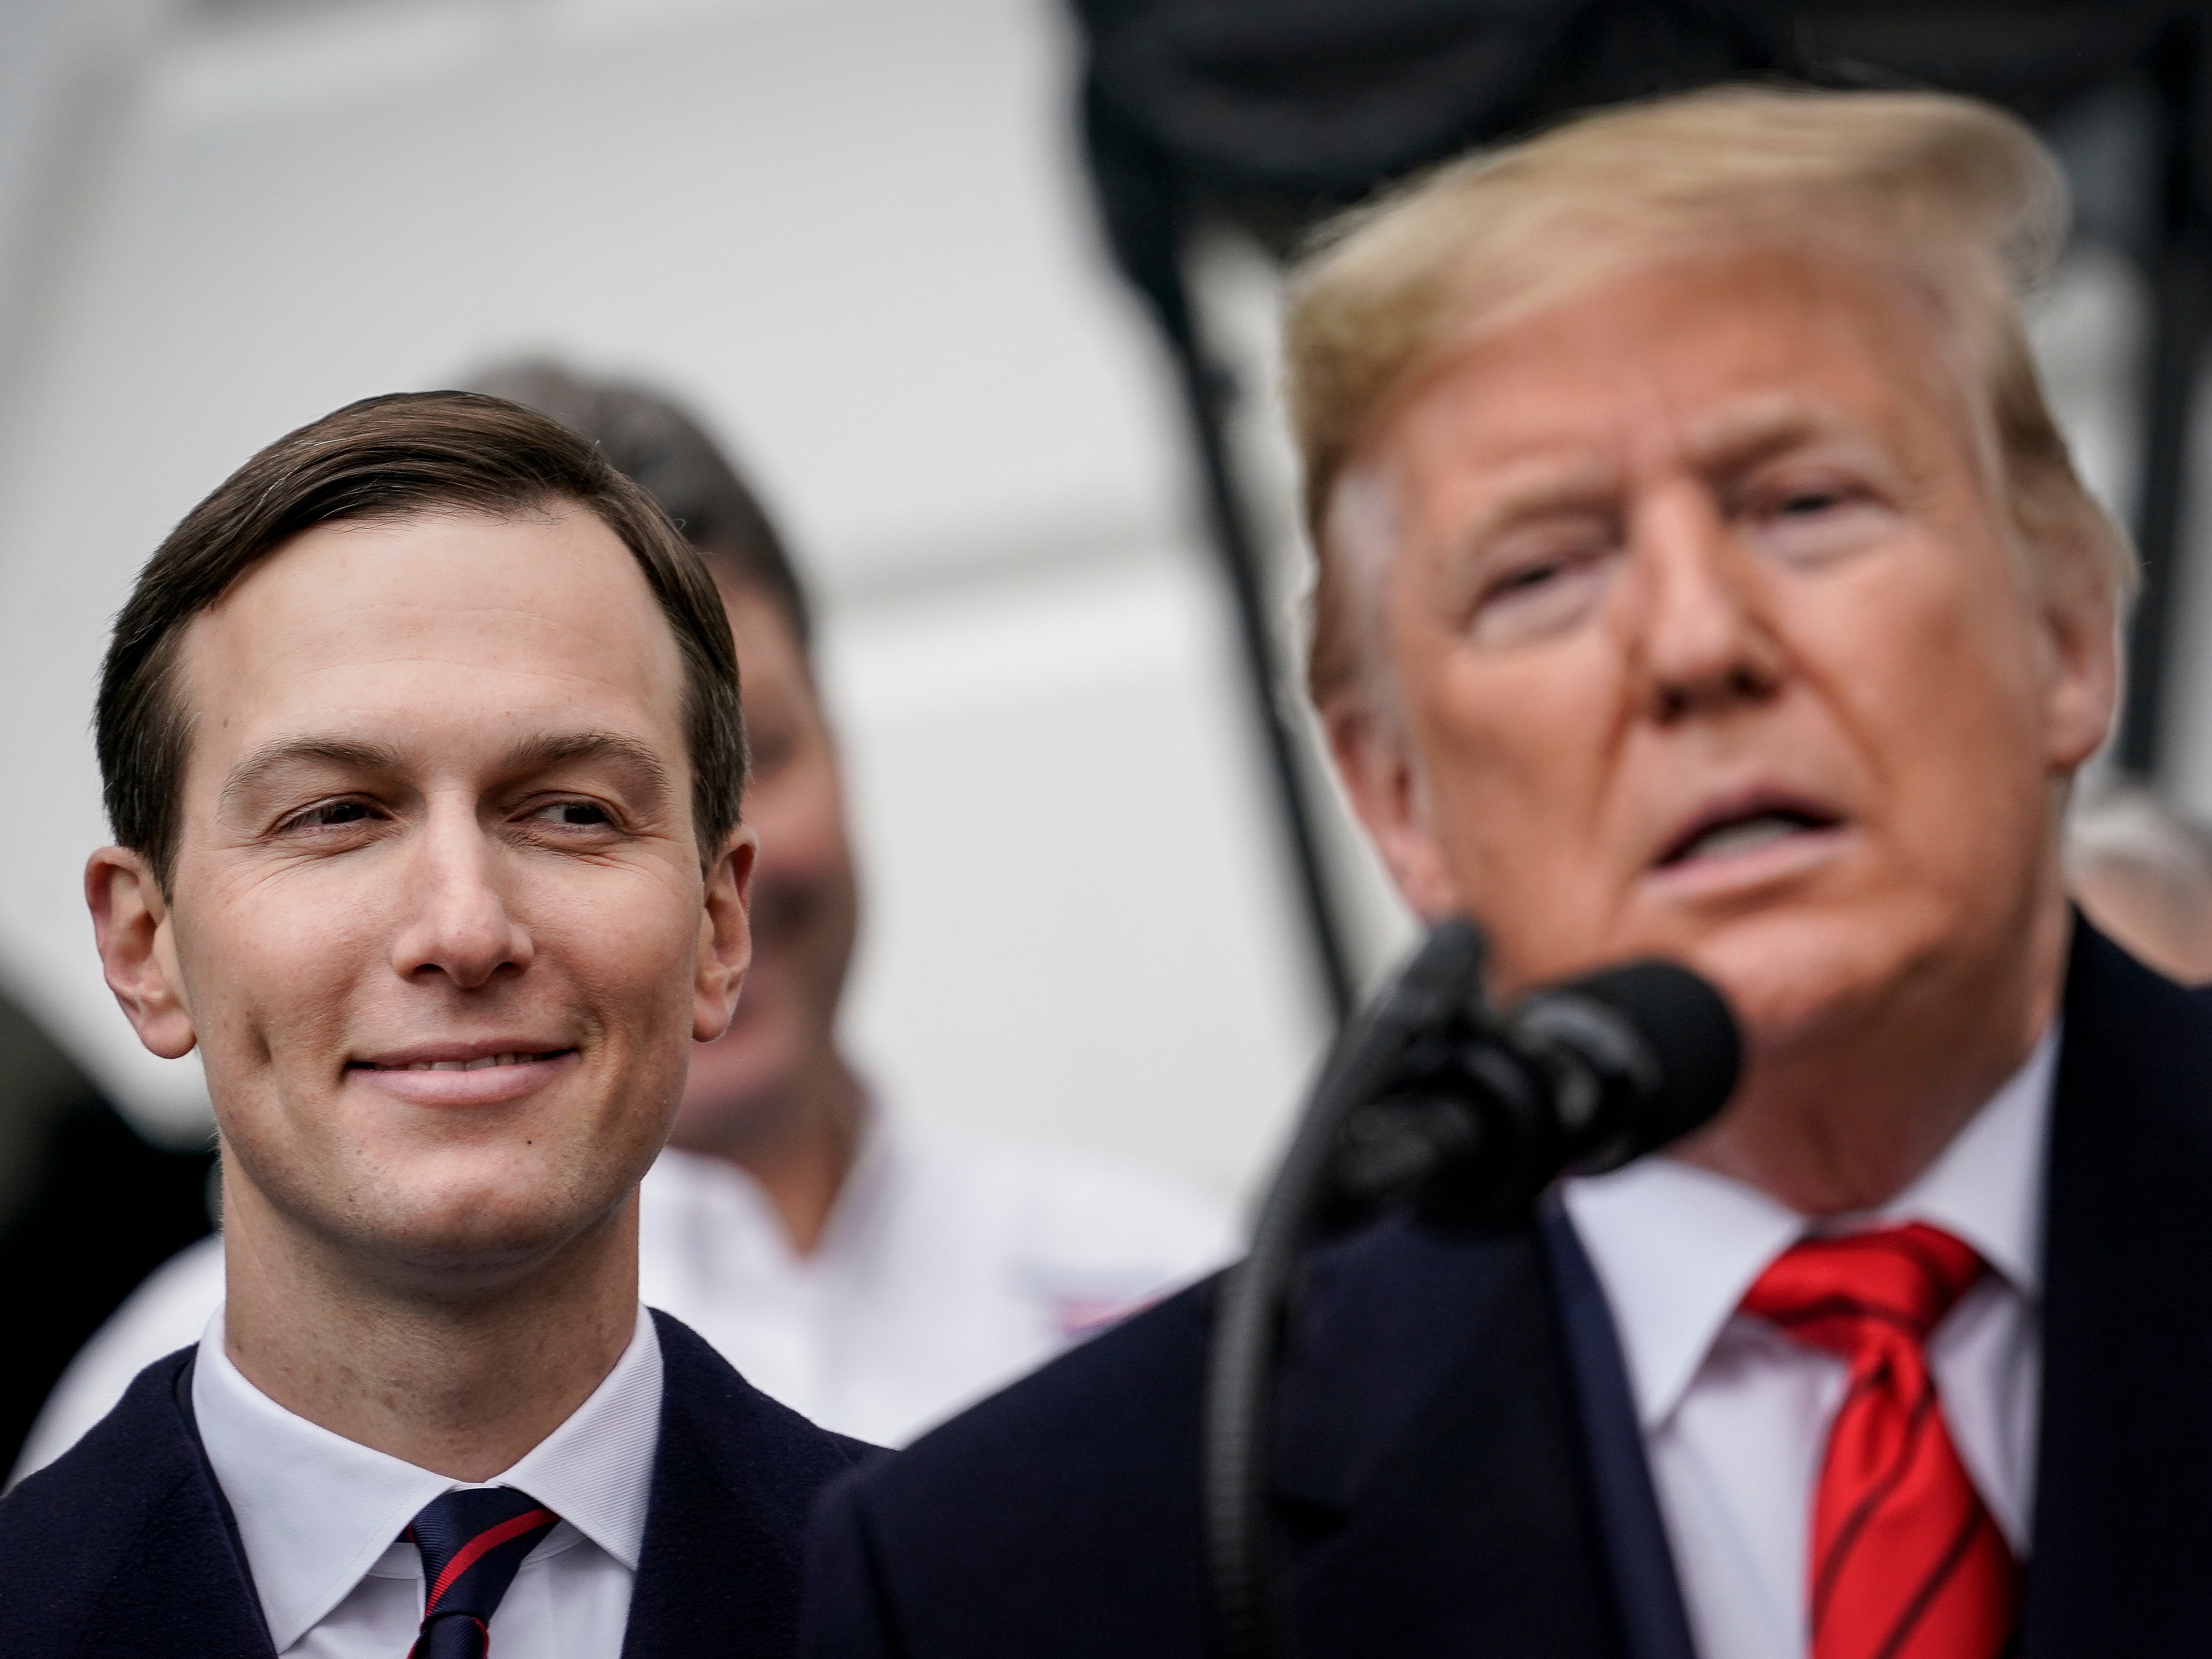 Donald Trump is ‘obviously thinking’ about running for US president again in 2024 according to his son-in-law and former aide Jared Kushner